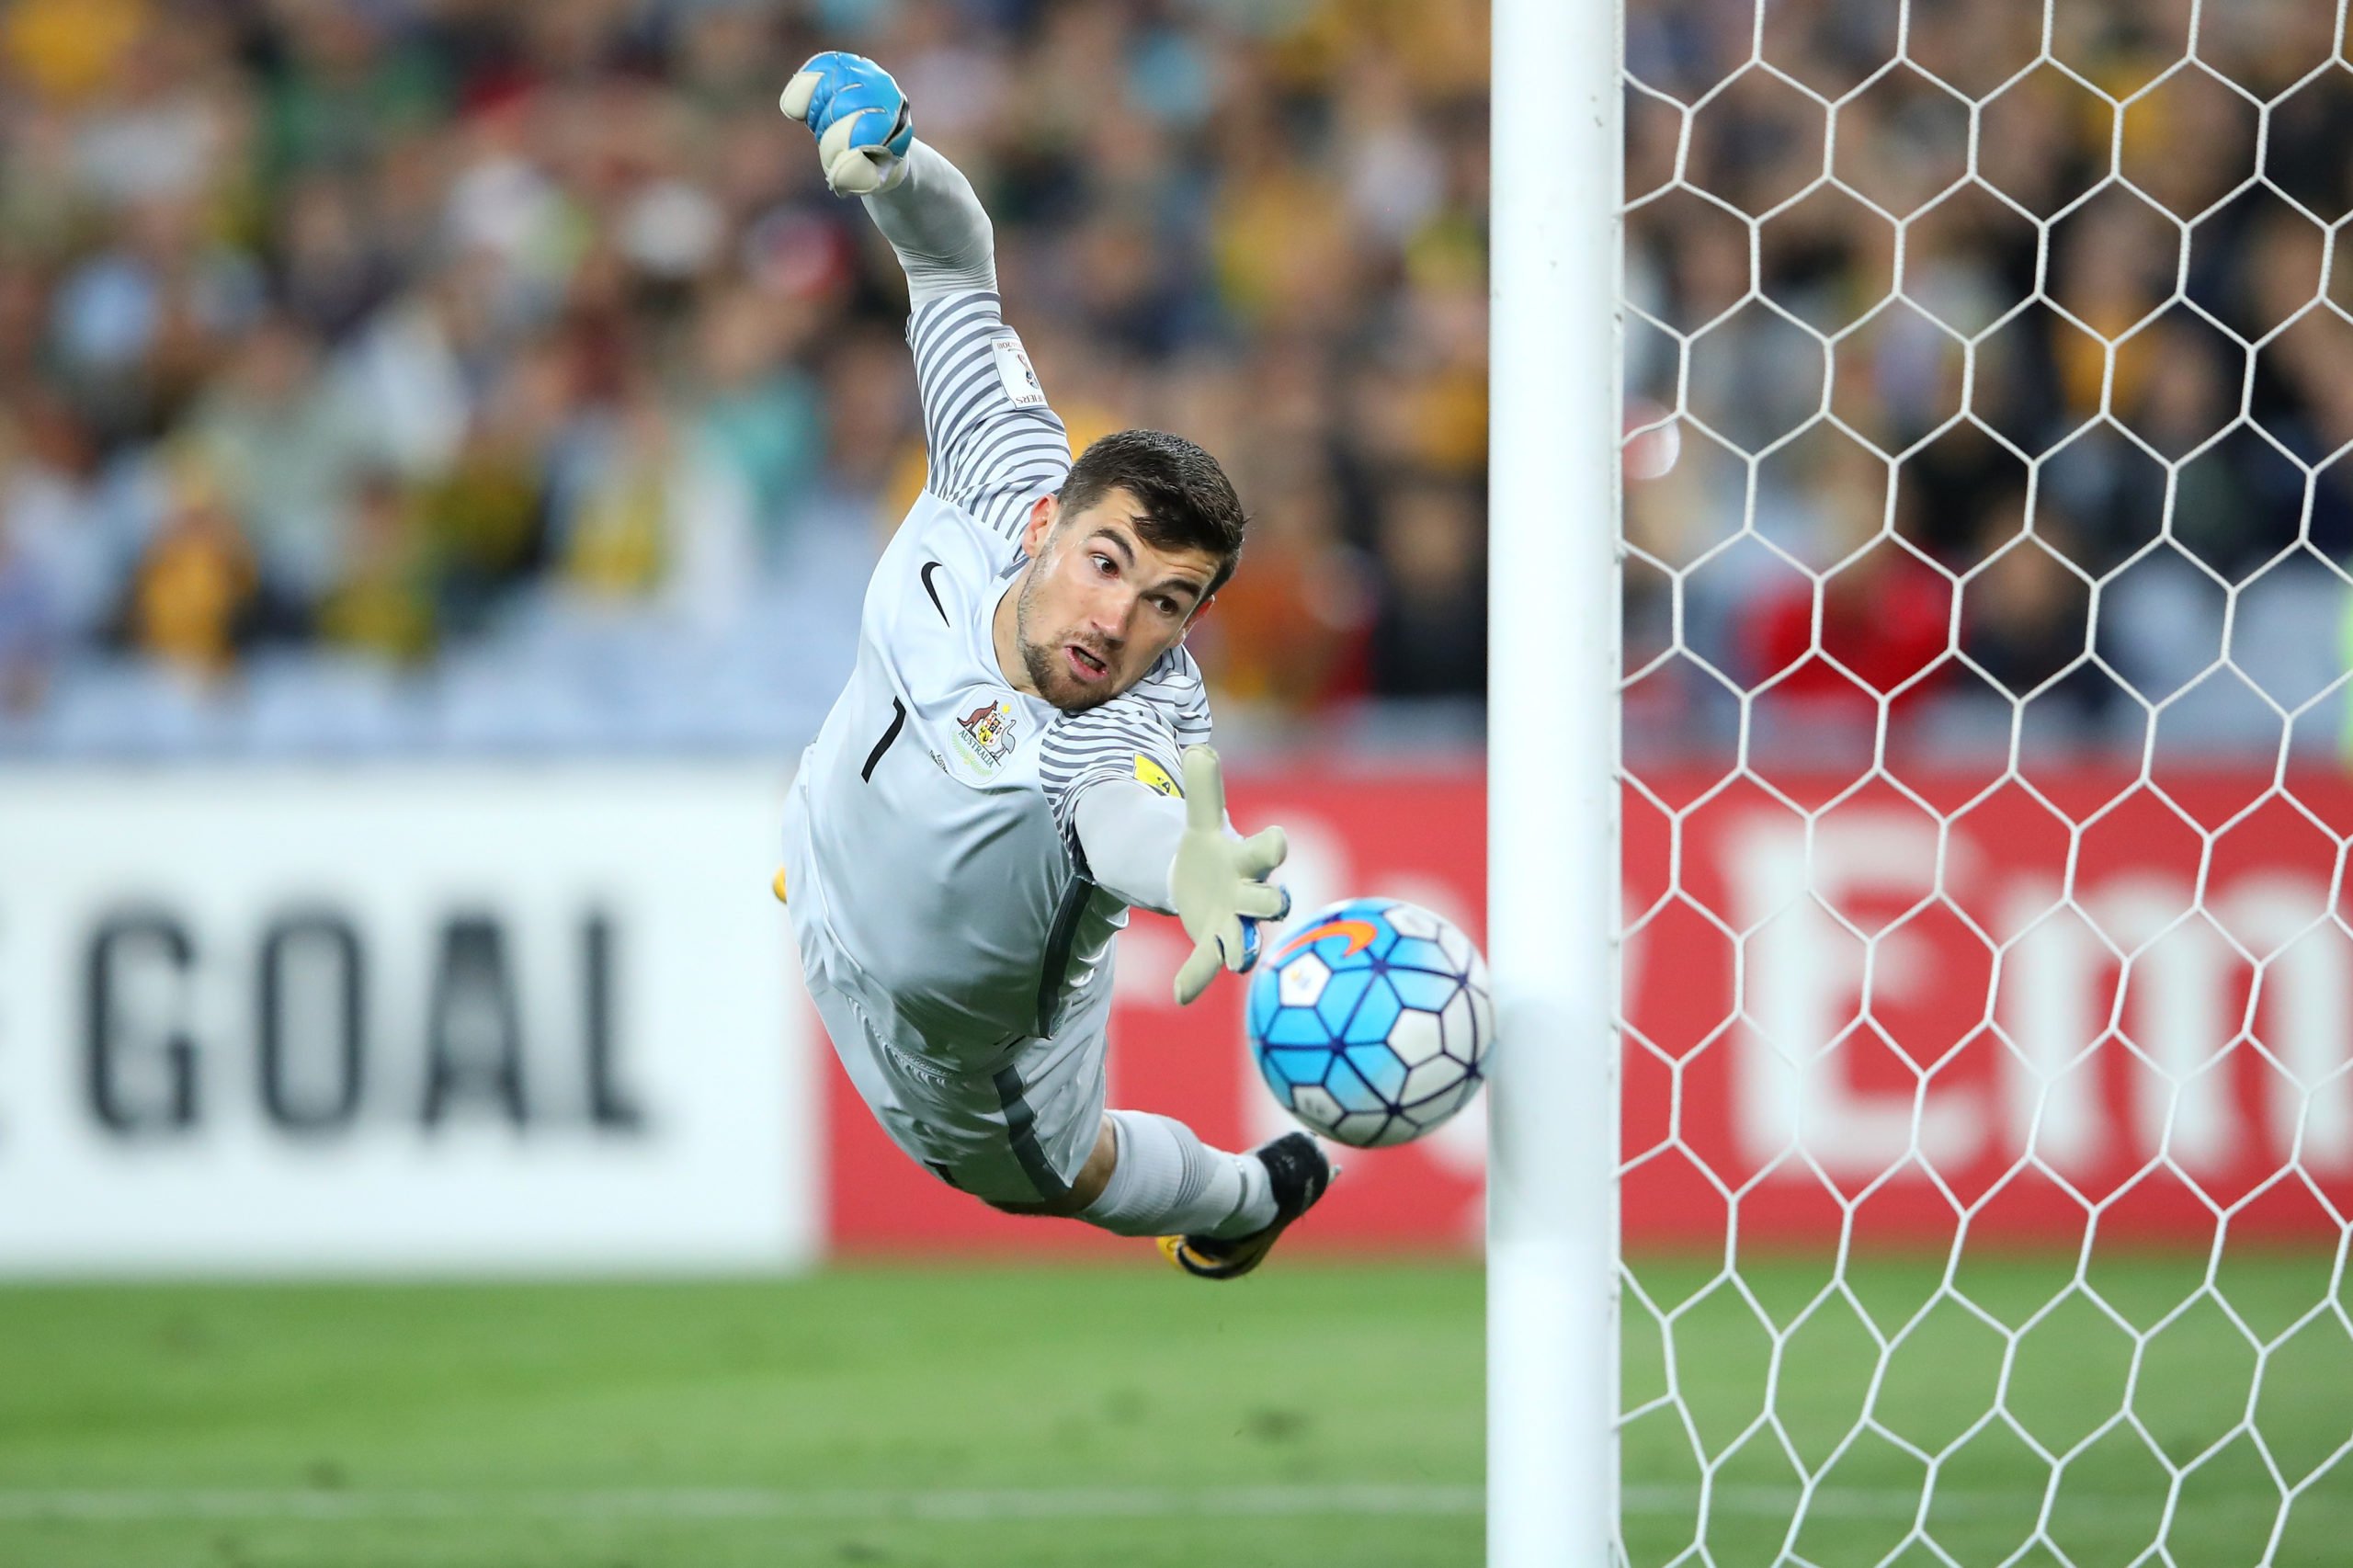 Mat Ryan has opened the door for Celtic; Postecoglou should be all over it